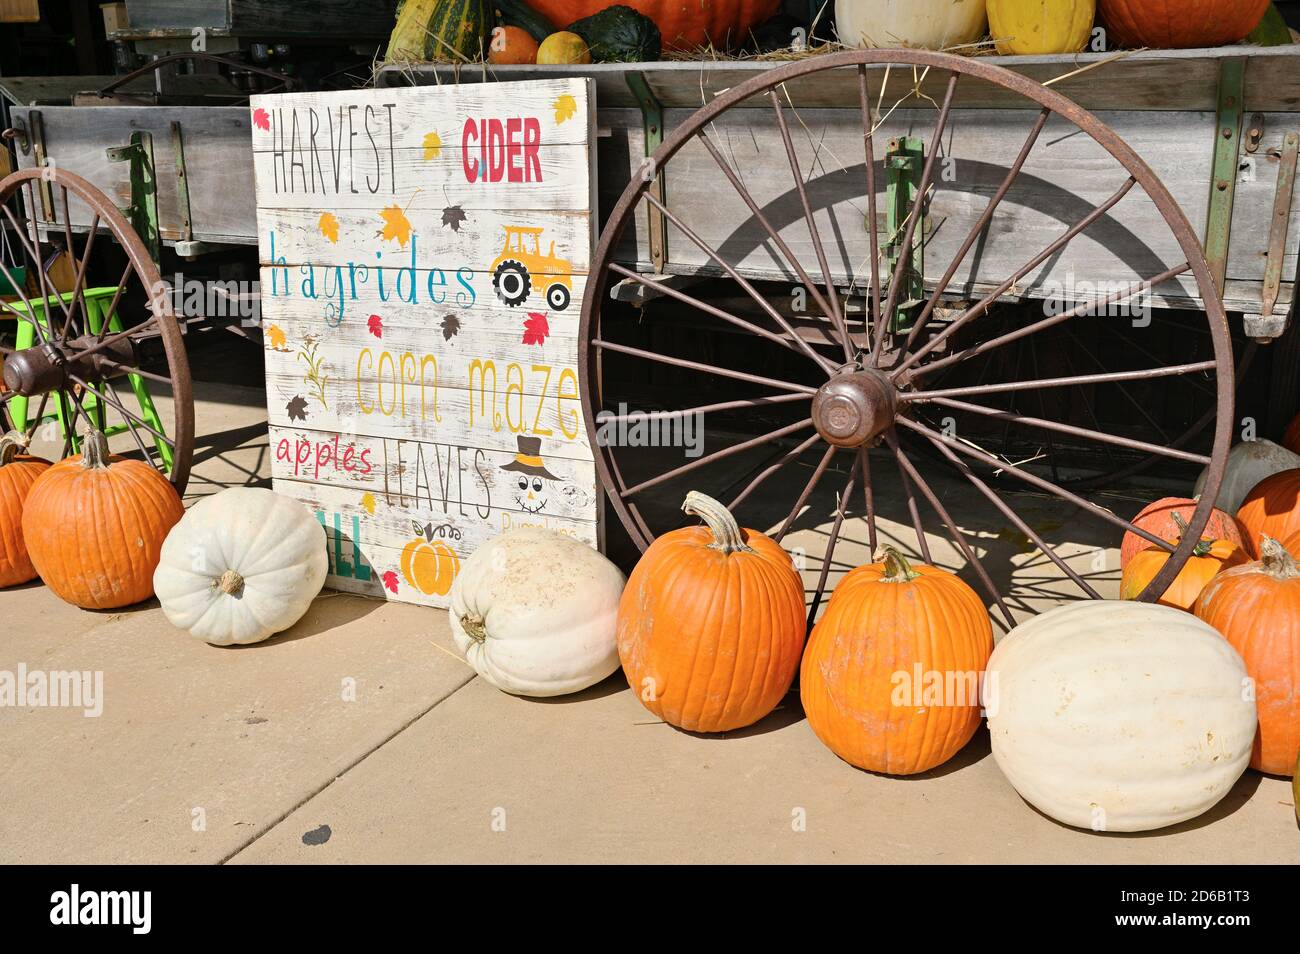 Pumpkins and gourds on display in front of an old wagon with a sign indicating the Fall or Autumn season is upon us in Alabama, USA. Stock Photo